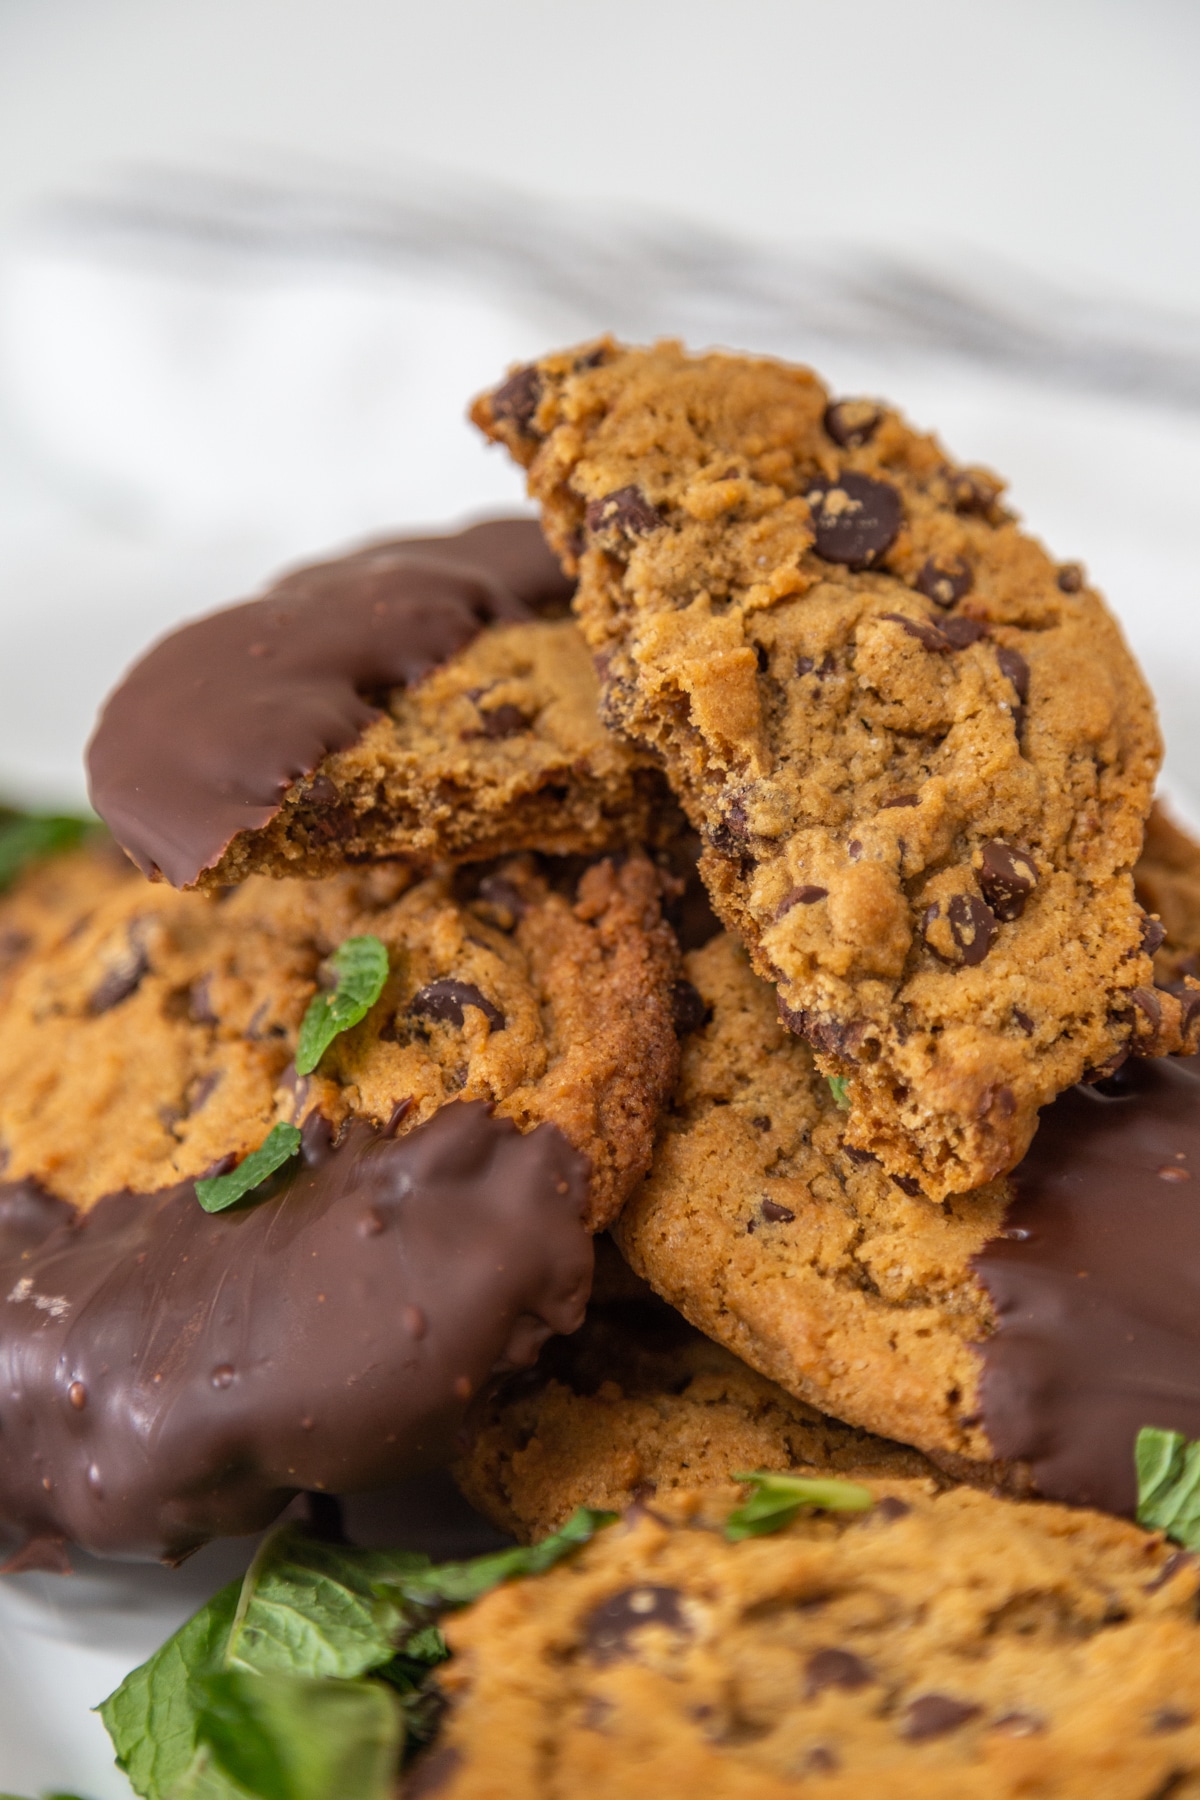 A pile of chocolate dipped cookies with mint leaves on a white platter.